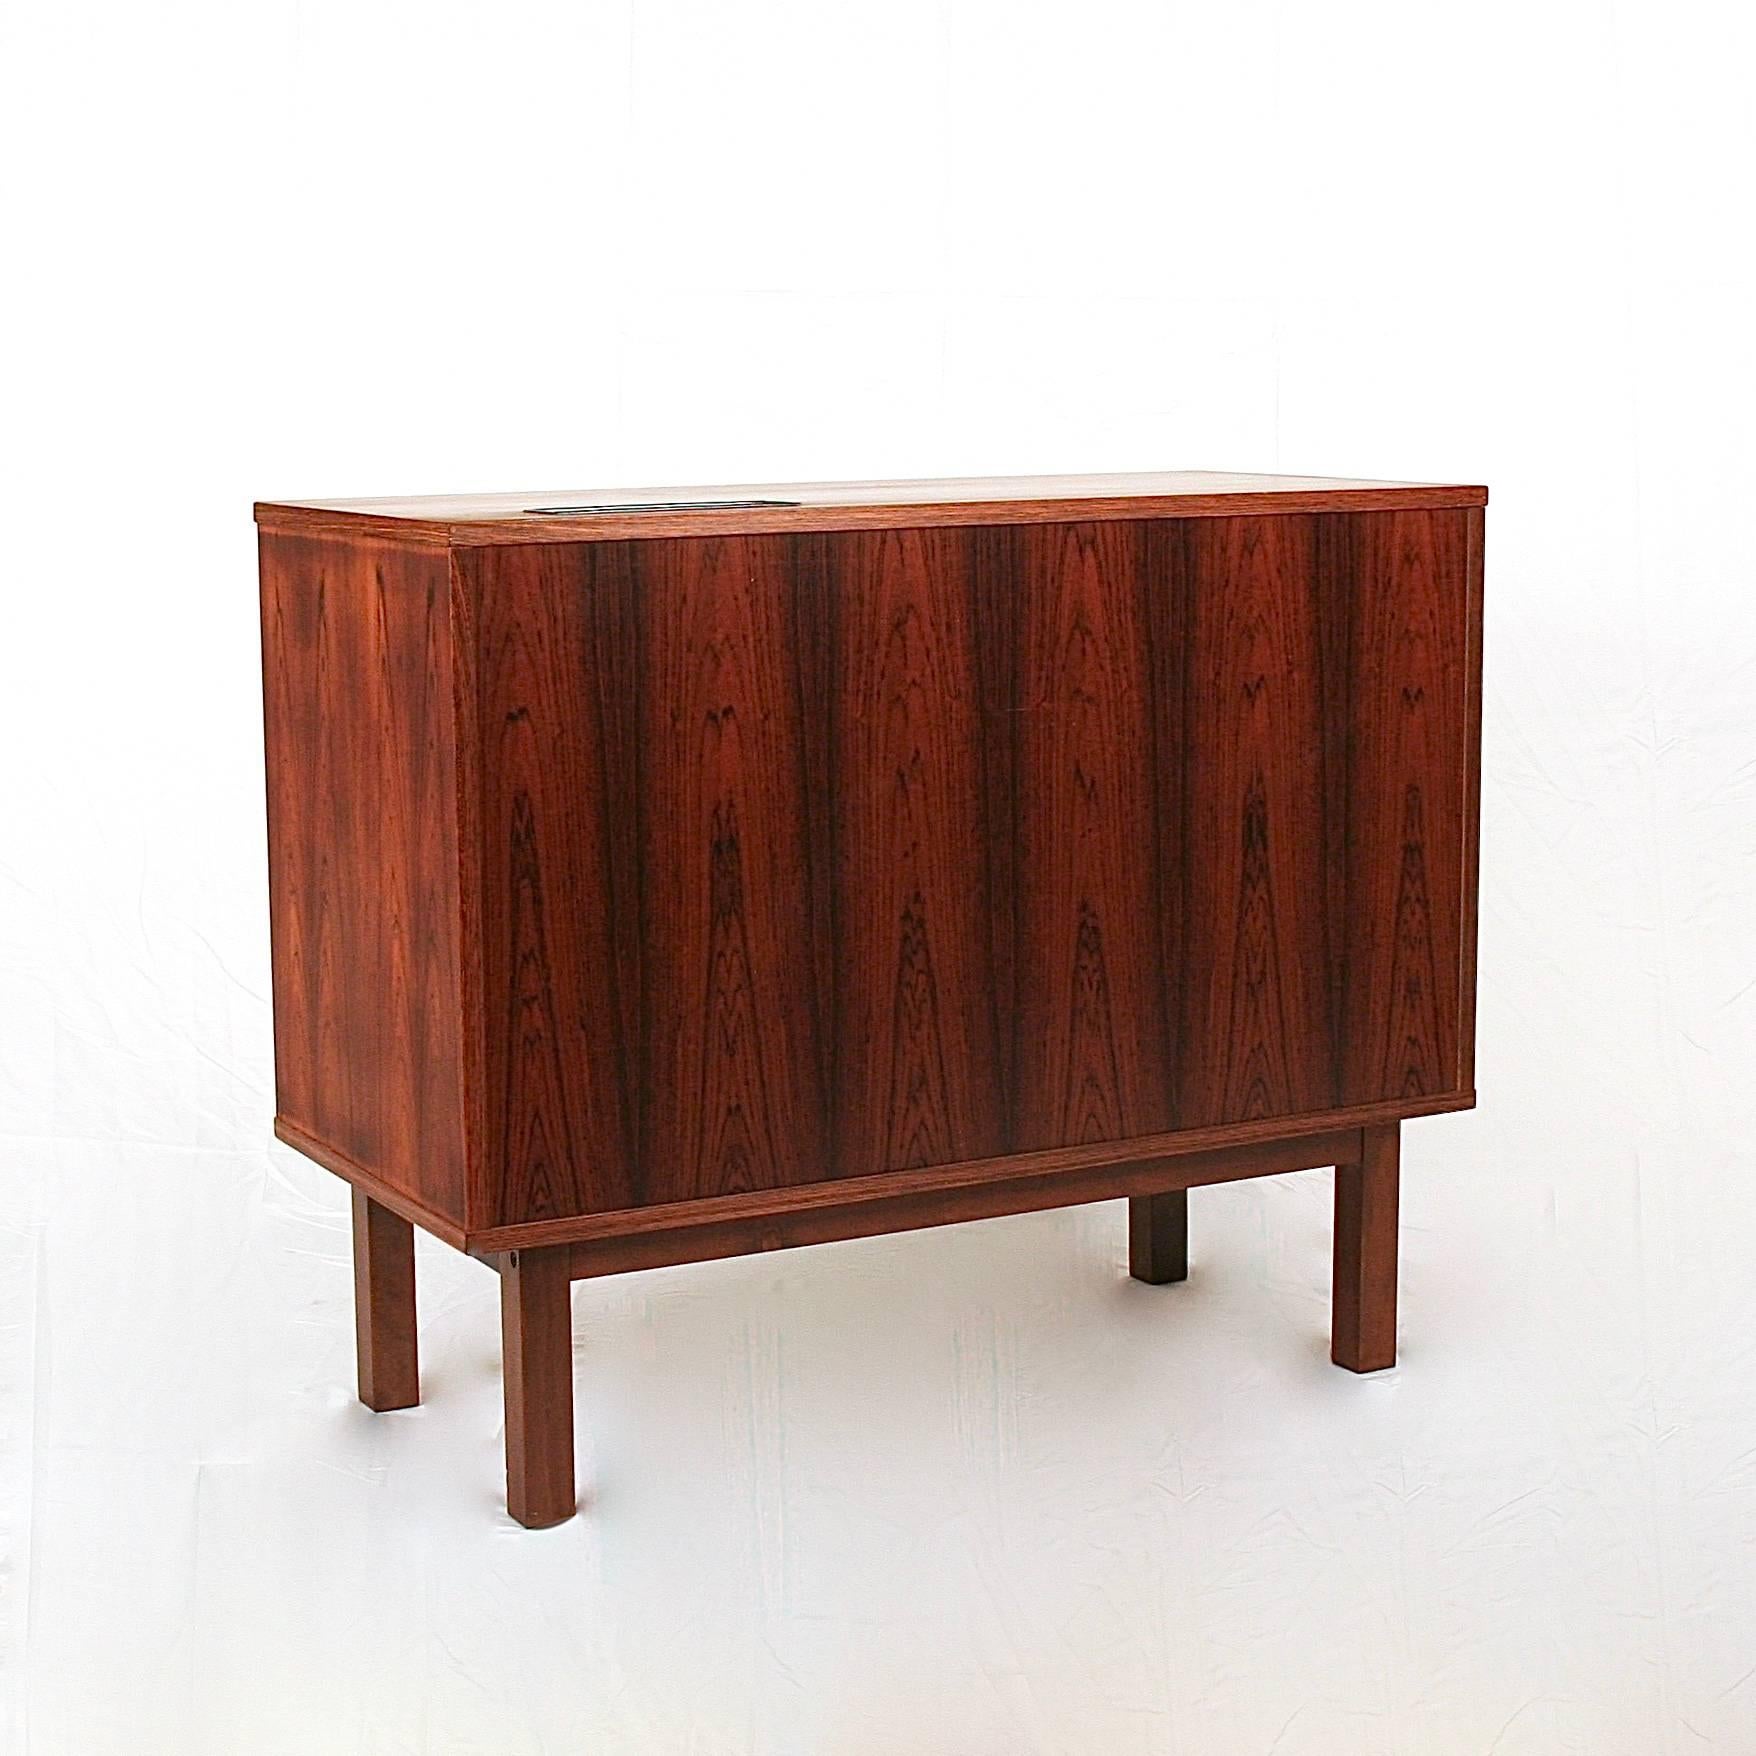 Vintage Danish rosewood cabinet with single tambour door. The door opens onto a split storage space, ideal for a mini bar or record player. A vent has been installed into the top of this piece which suggests it was used to house a mini fridge at